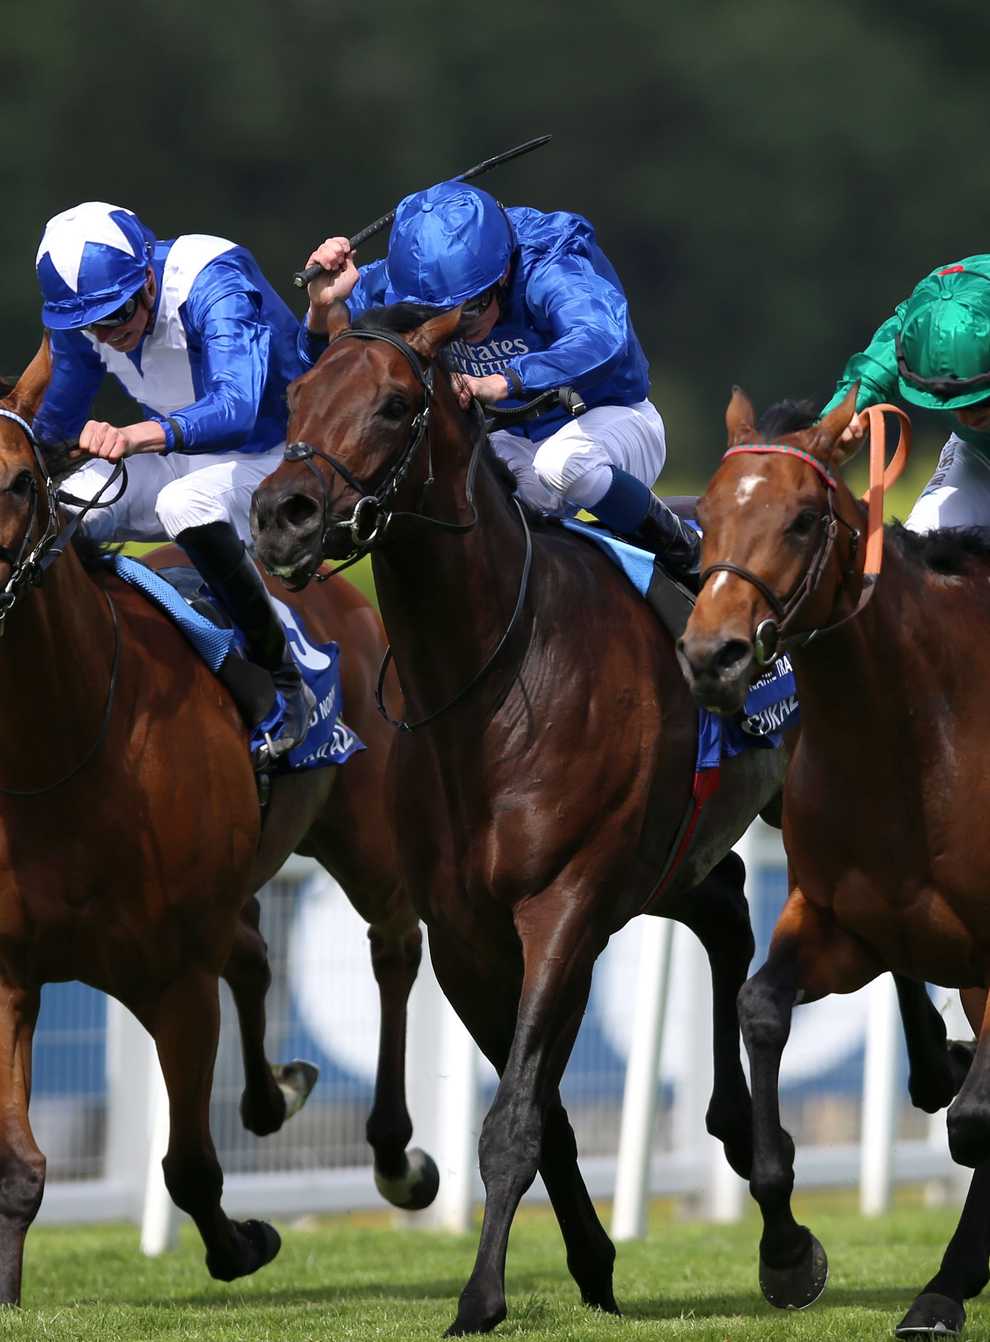 Vadeni (right) winning the Coral-Eclipse at Sandown (Nigel French/PA)